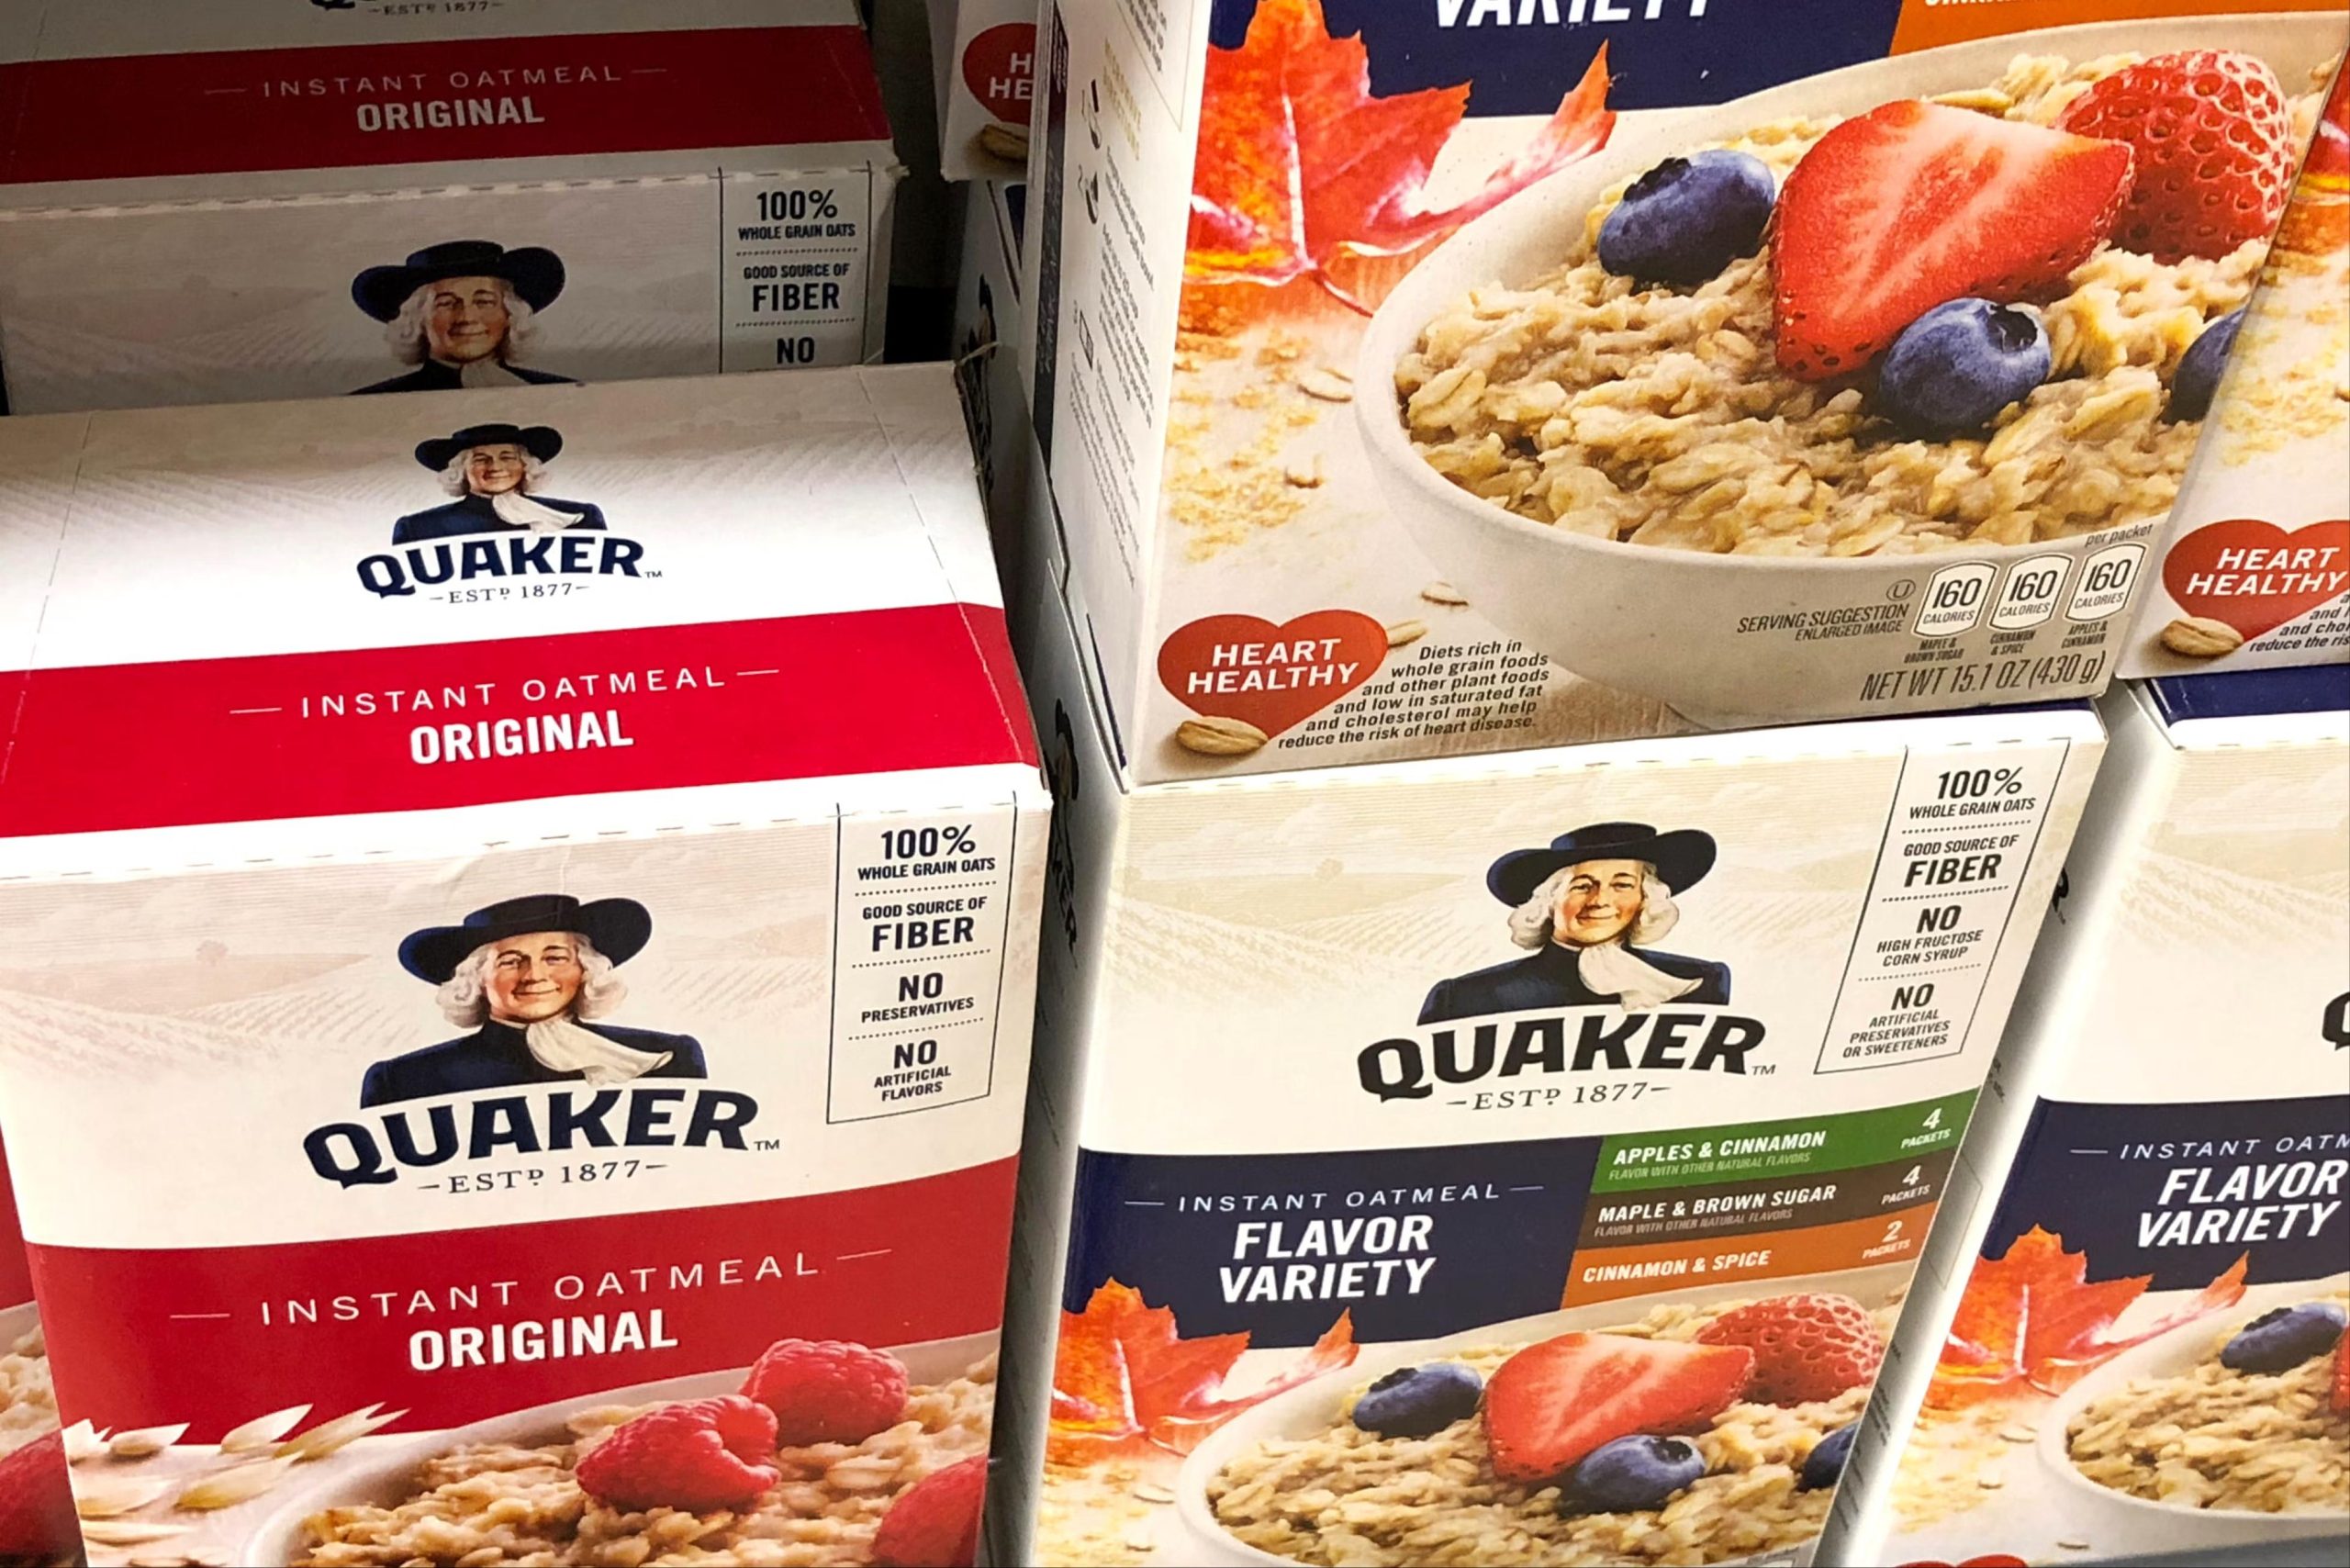 What are the side effects of Quaker Oats? - ABTC